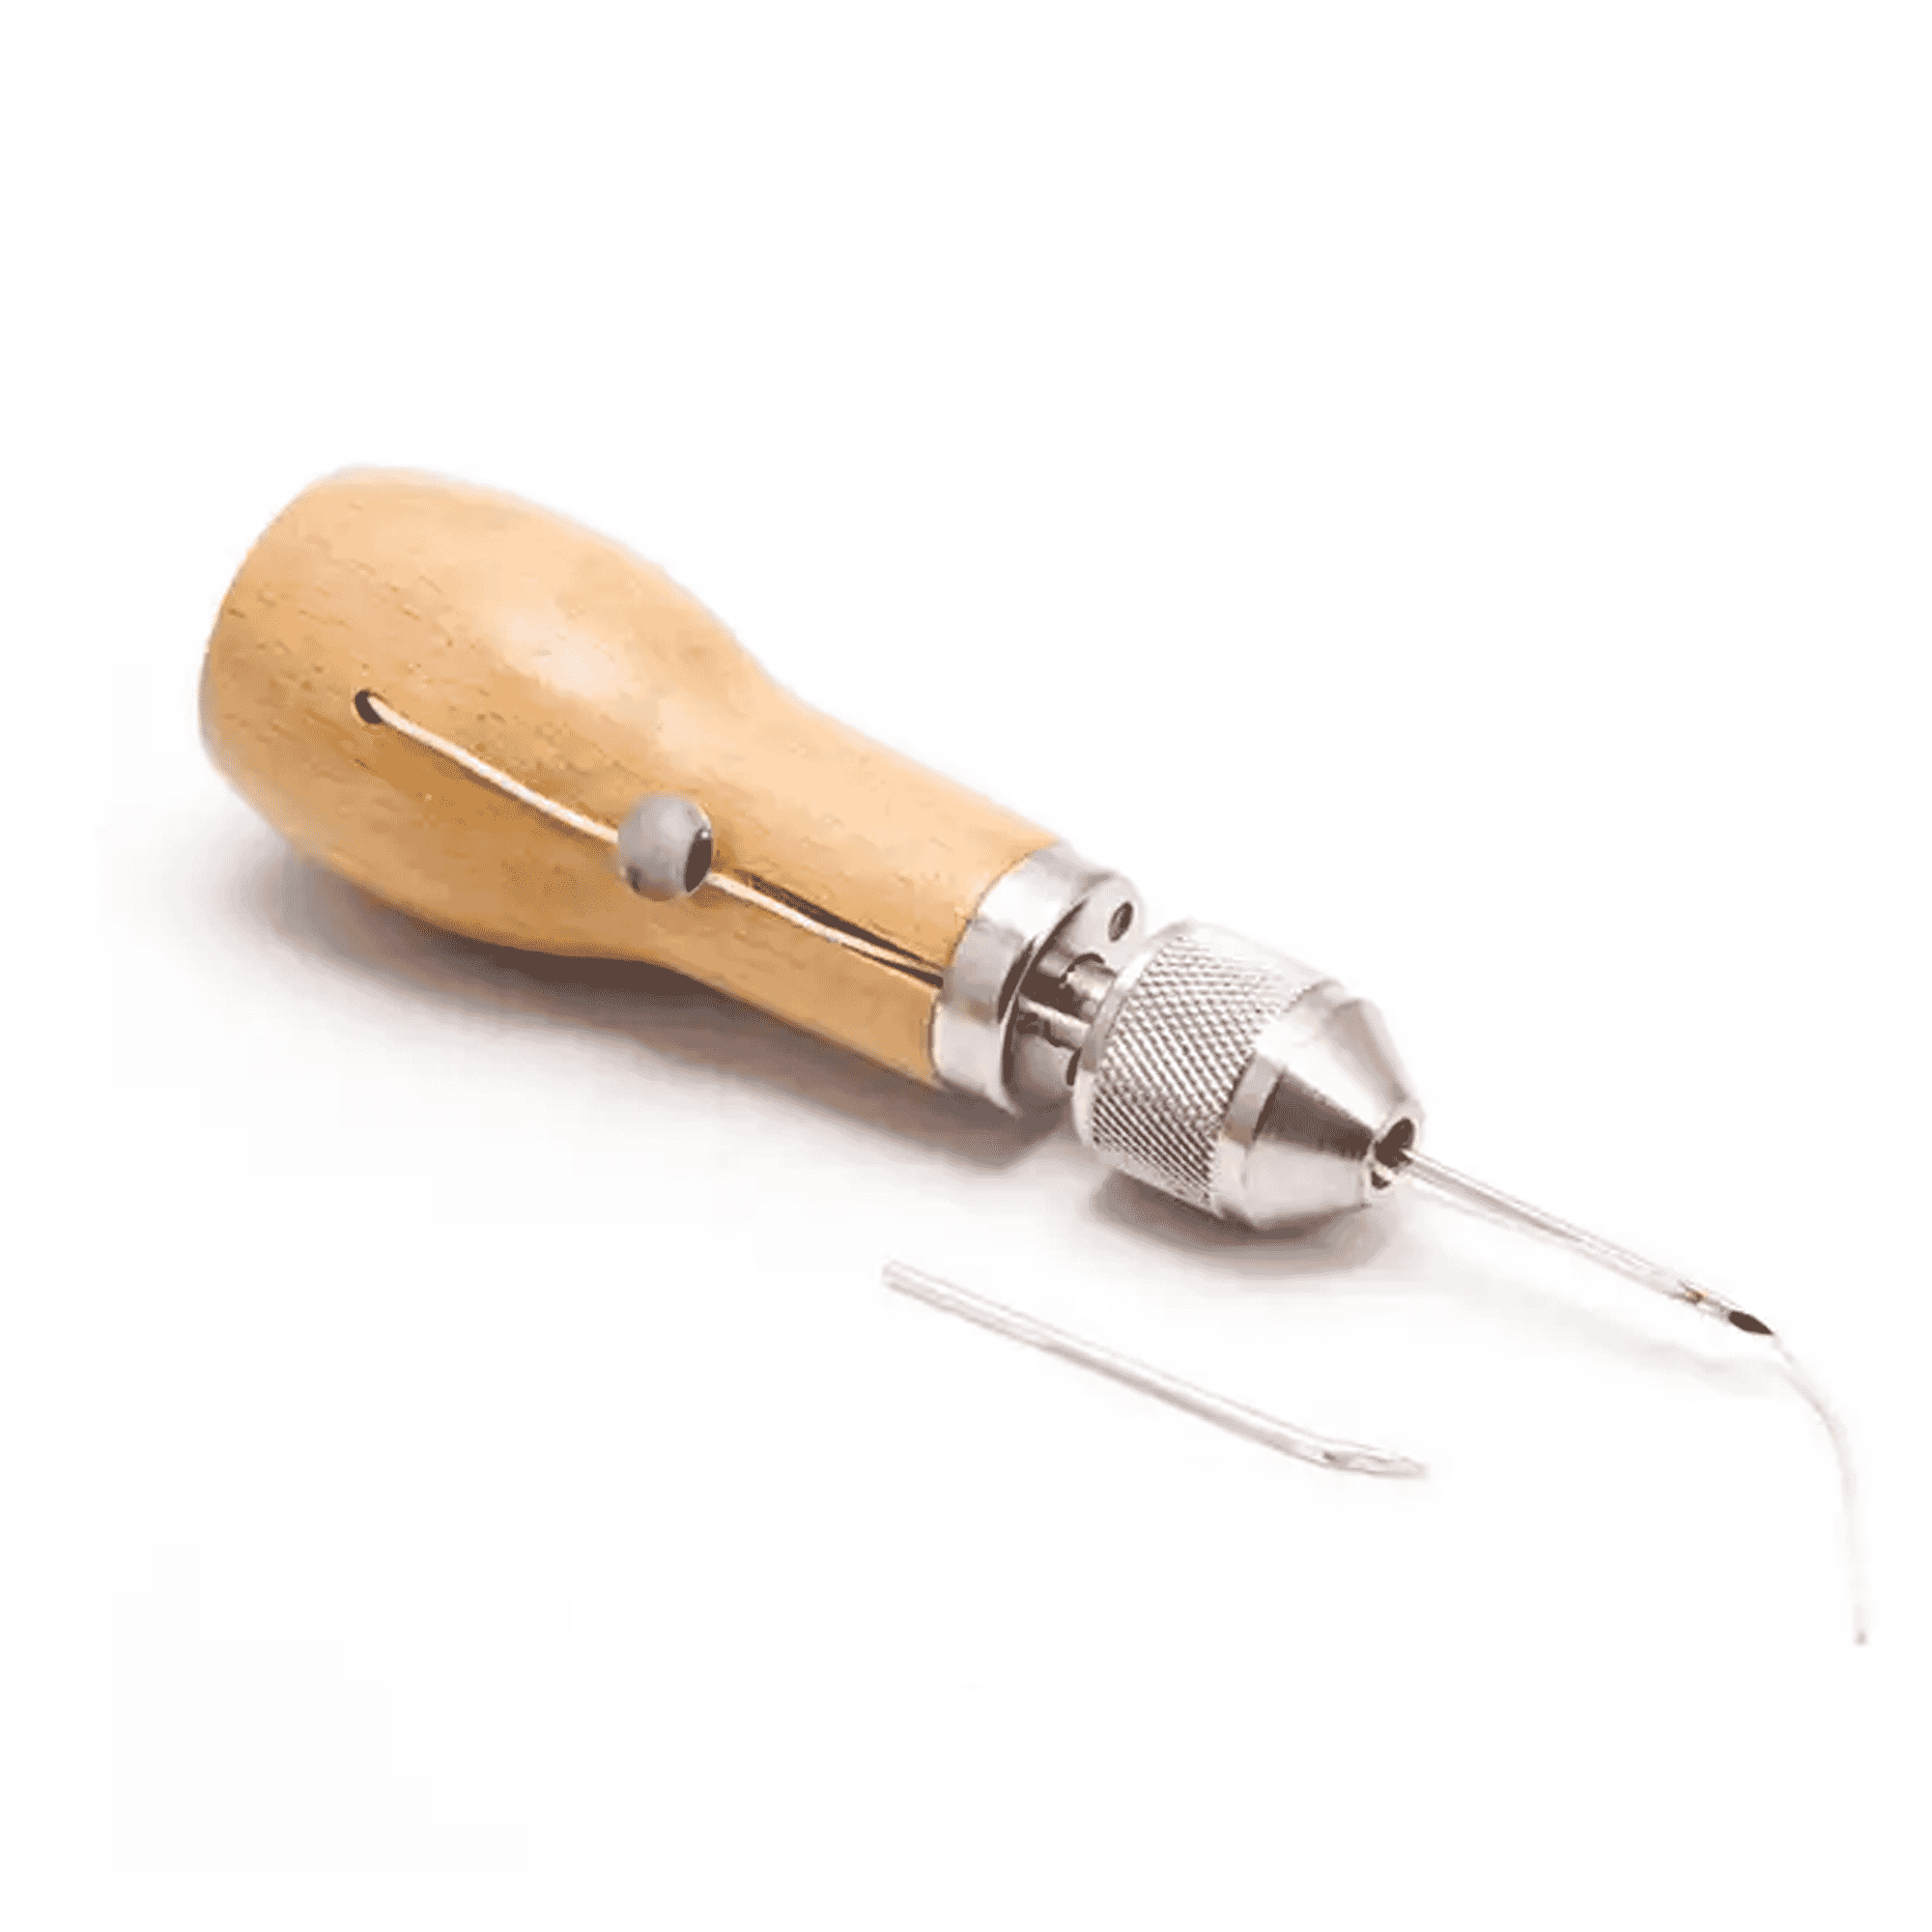 Sewing Awl with Thread - Essential Tool for Inflatable Repair and Small  Sewing Projects